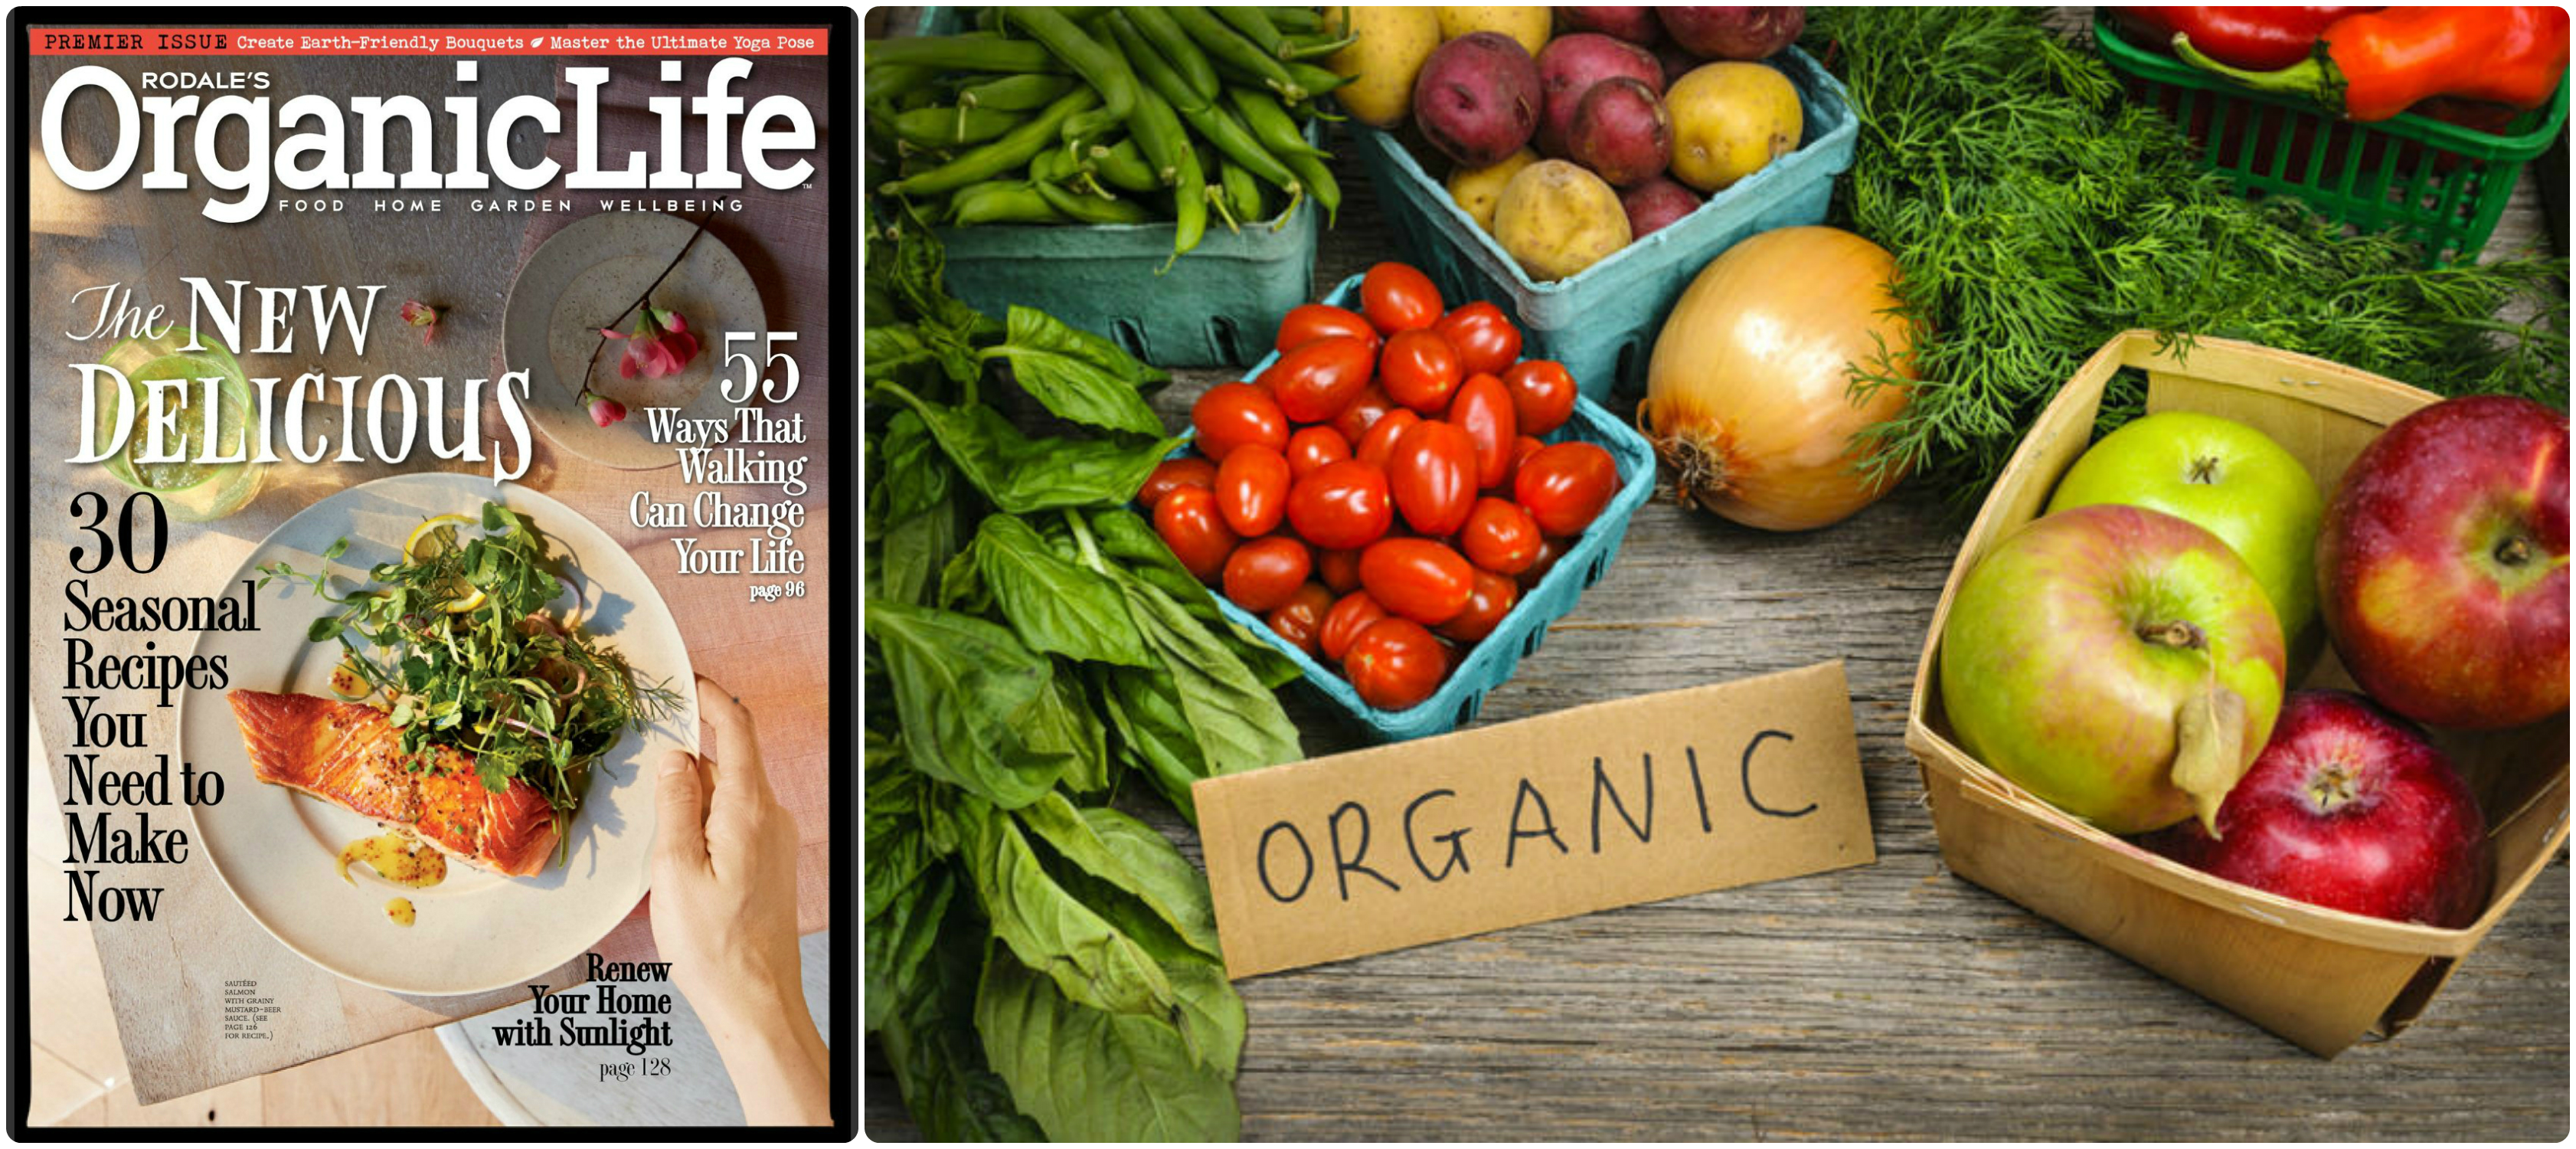 Organic Life Magazine Subscription Only $5.99/Year - Hip2Save